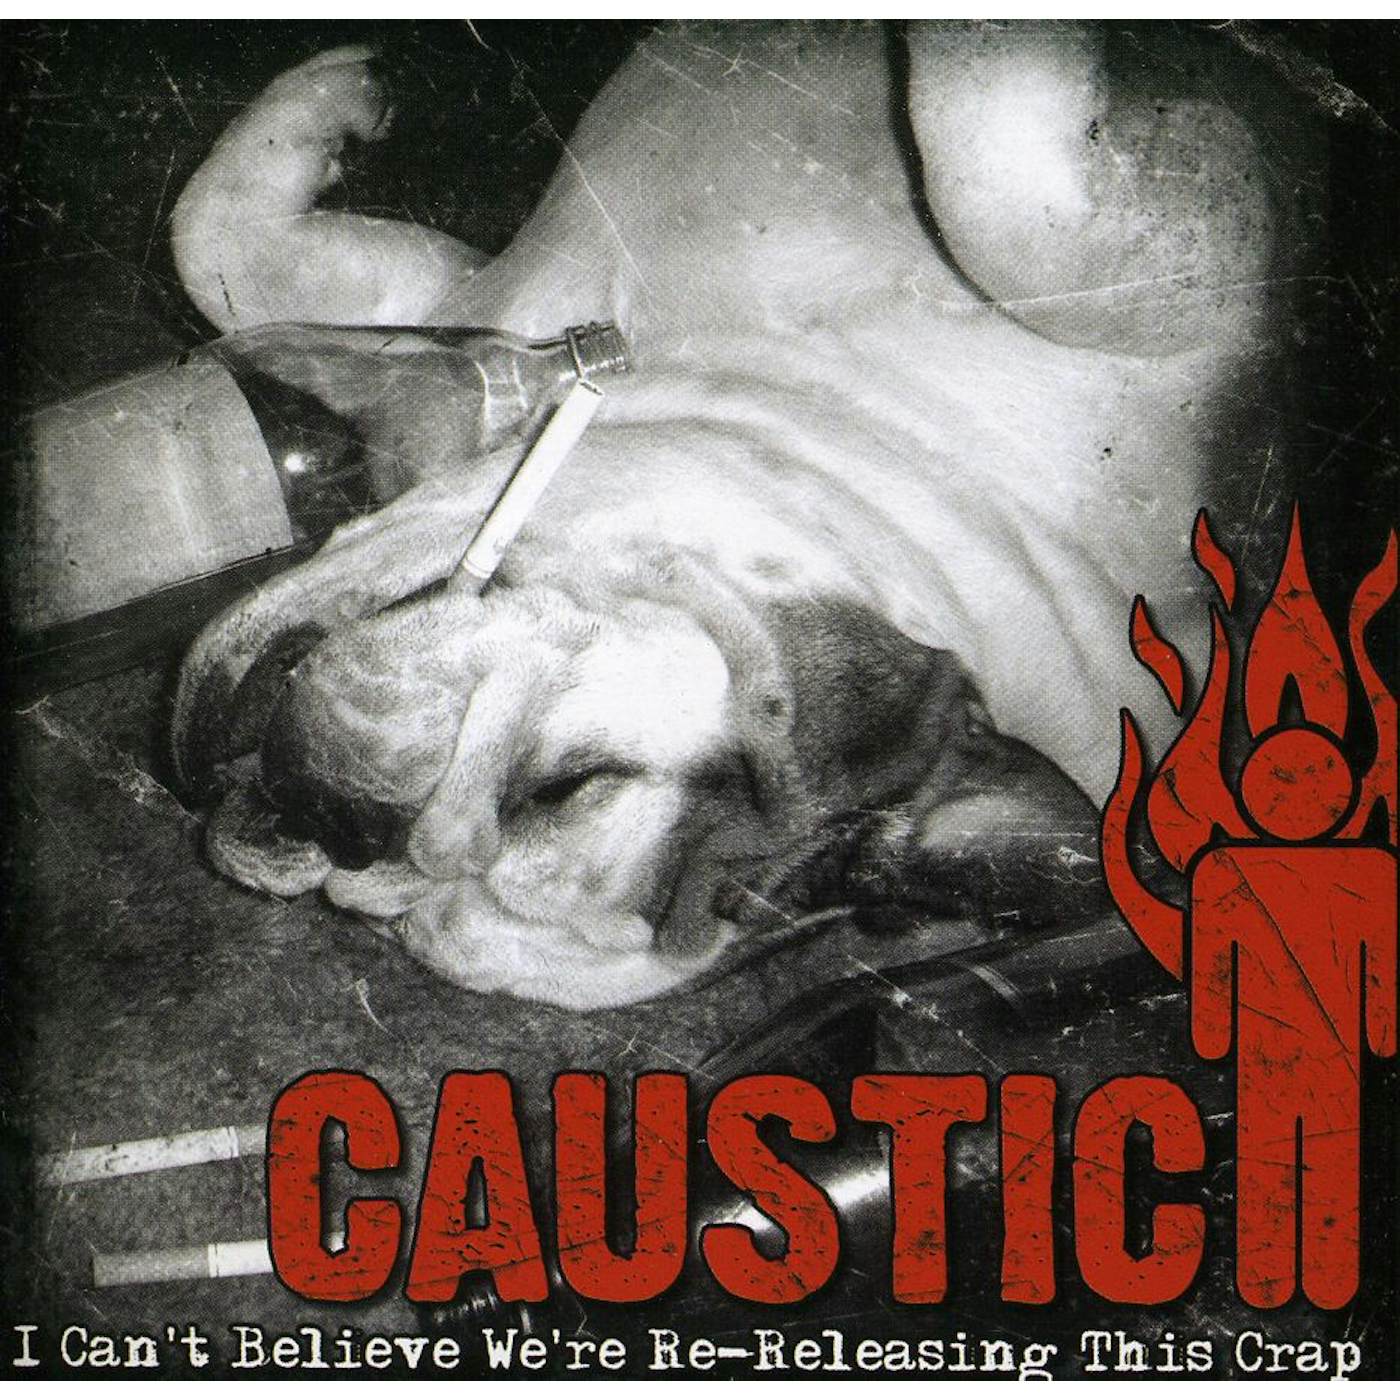 Caustic I CAN'T BELIEVE WE'RE RE-RELEASING THIS CRAP CD